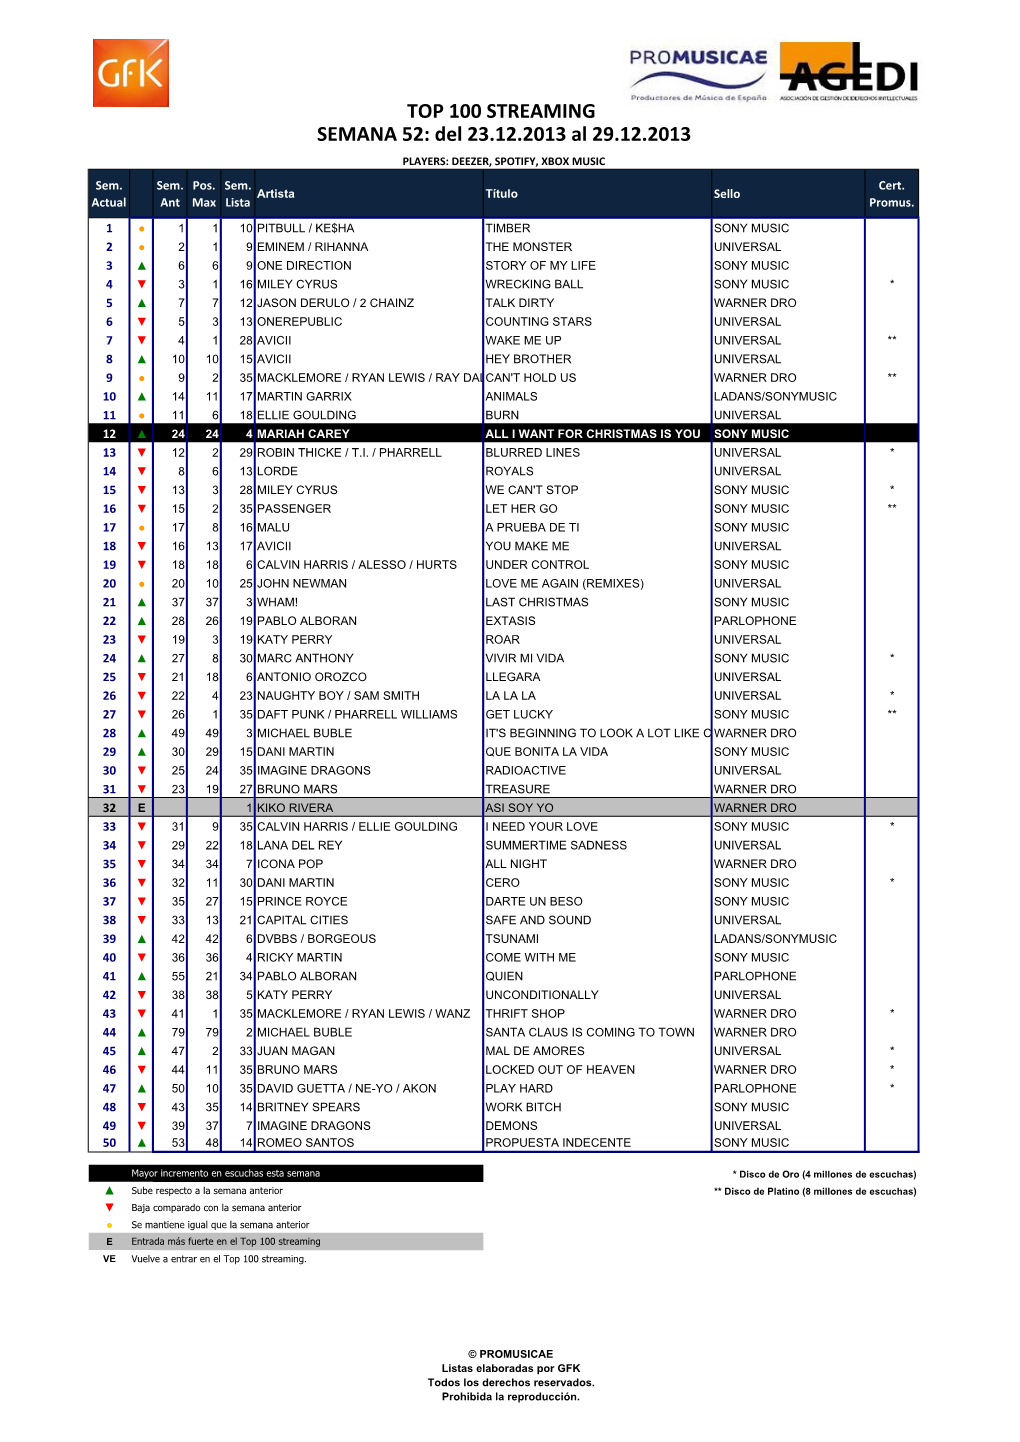 Top 100 Streaming W52.2013